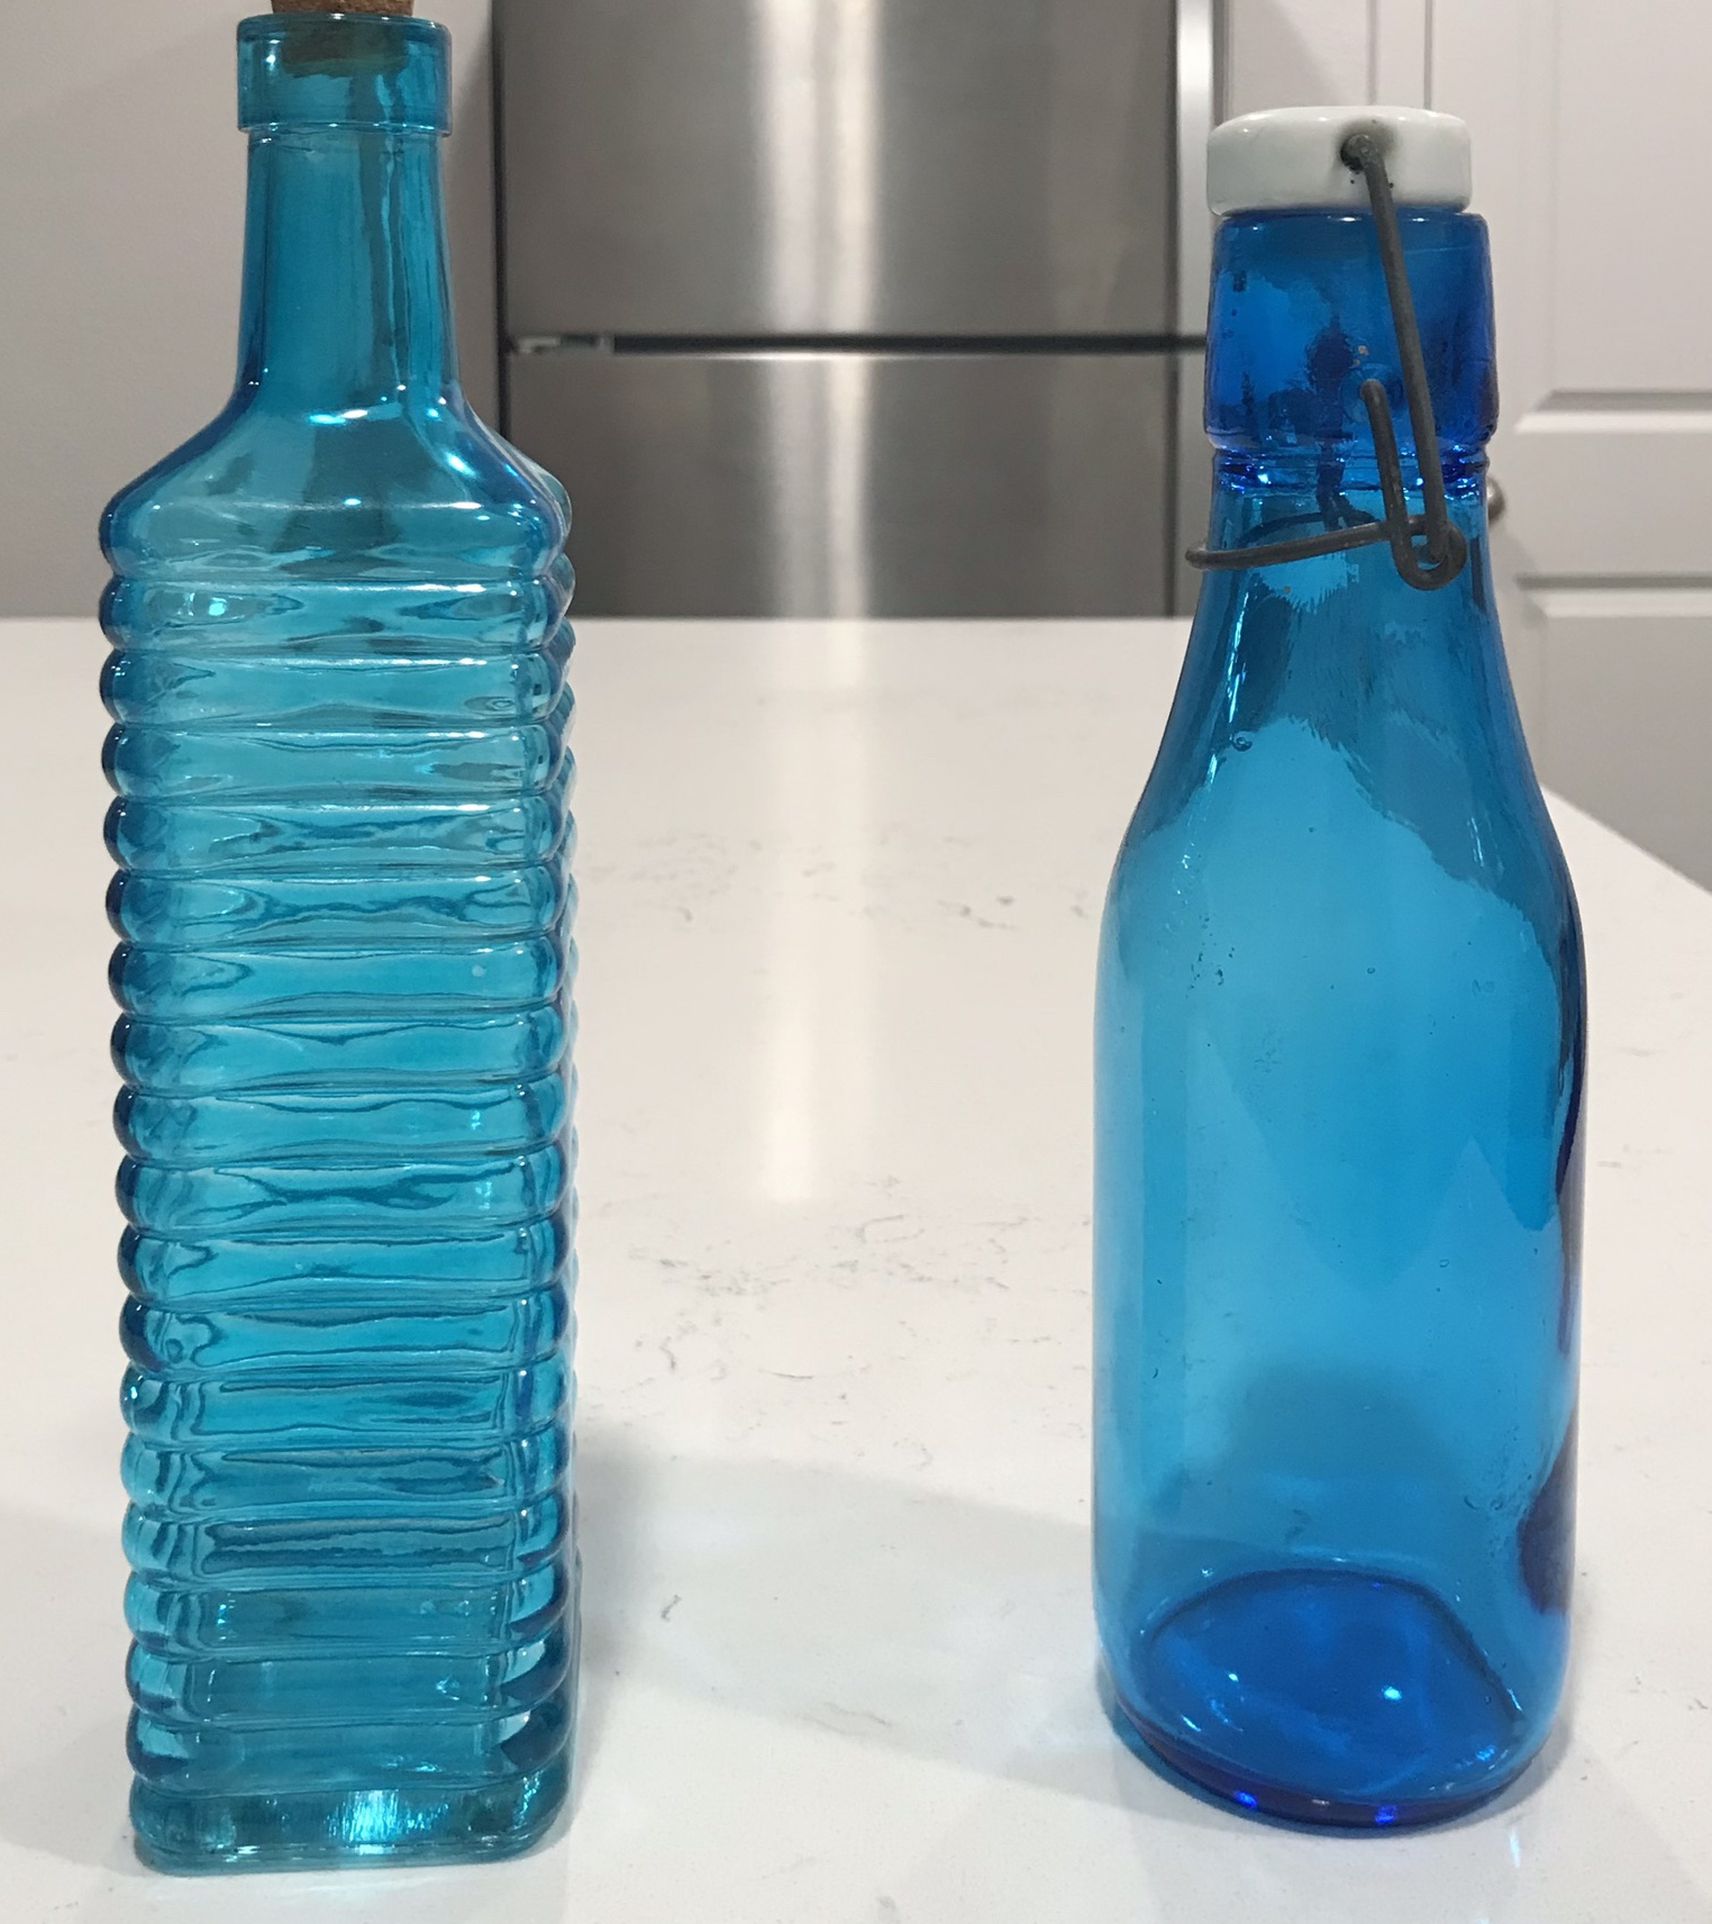 BEAUTIFUL VINTAGE APOTHECARY STYLE BLUE BOTTLES. ONE WITH DETACHABLE CERAMIC LID. IN GREAT CONDITION.